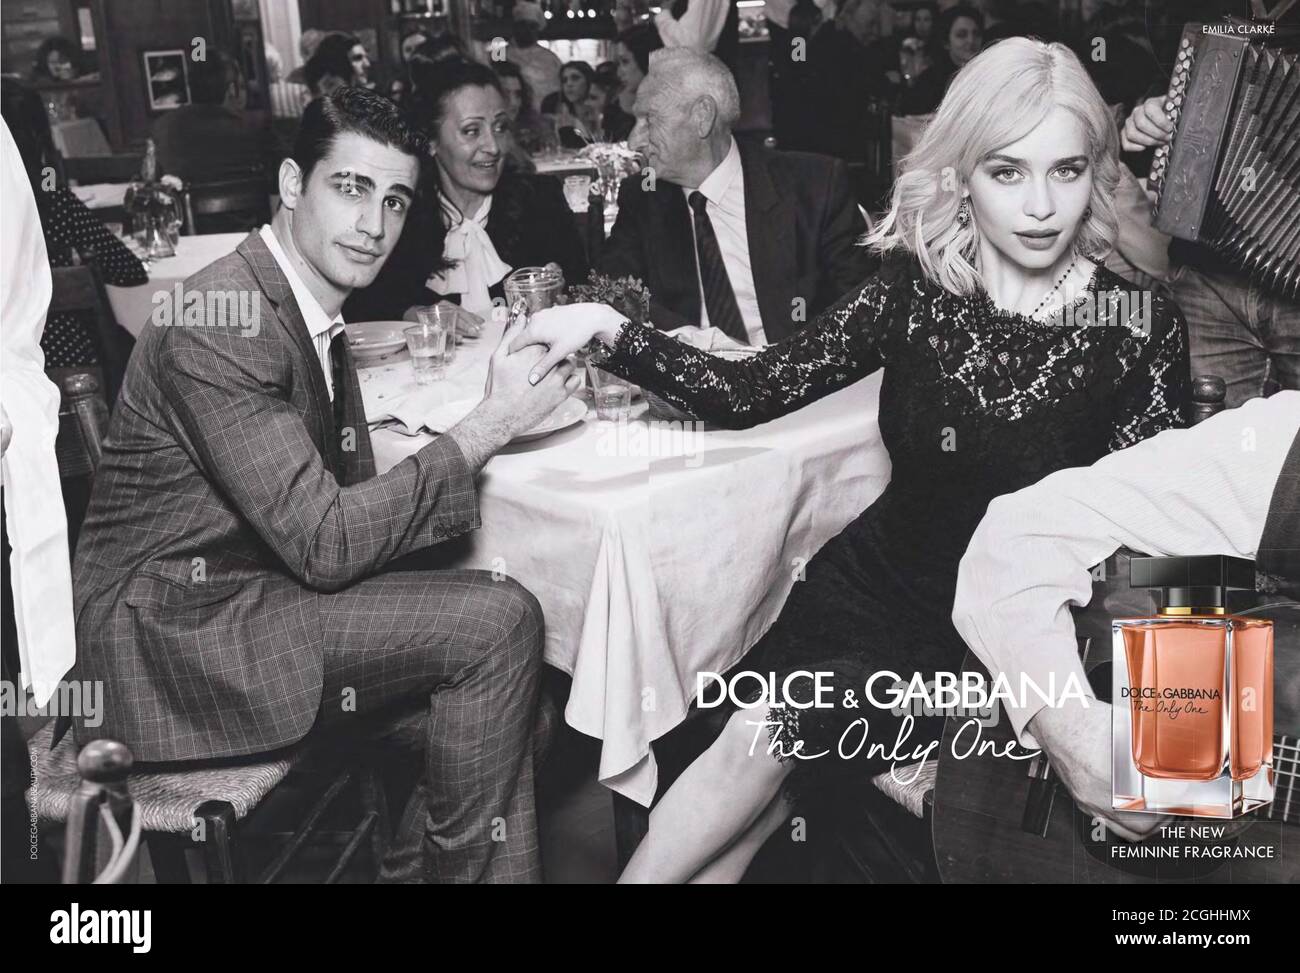 dolce & gabbana the only one advert